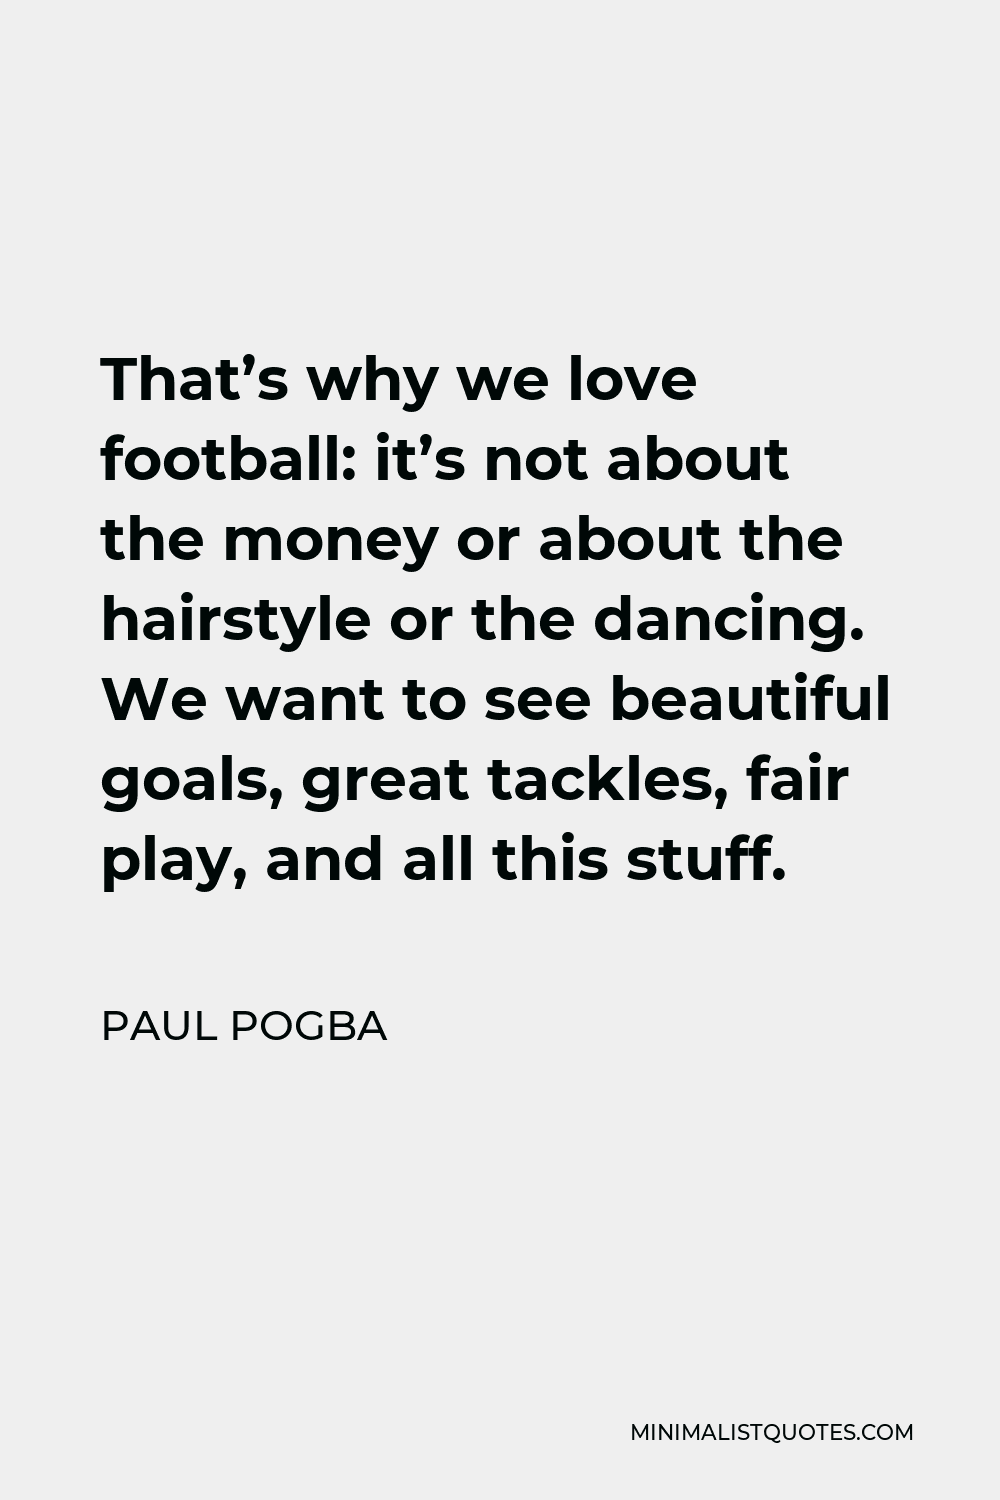 Paul Pogba Quote - That’s why we love football: it’s not about the money or about the hairstyle or the dancing. We want to see beautiful goals, great tackles, fair play, and all this stuff.